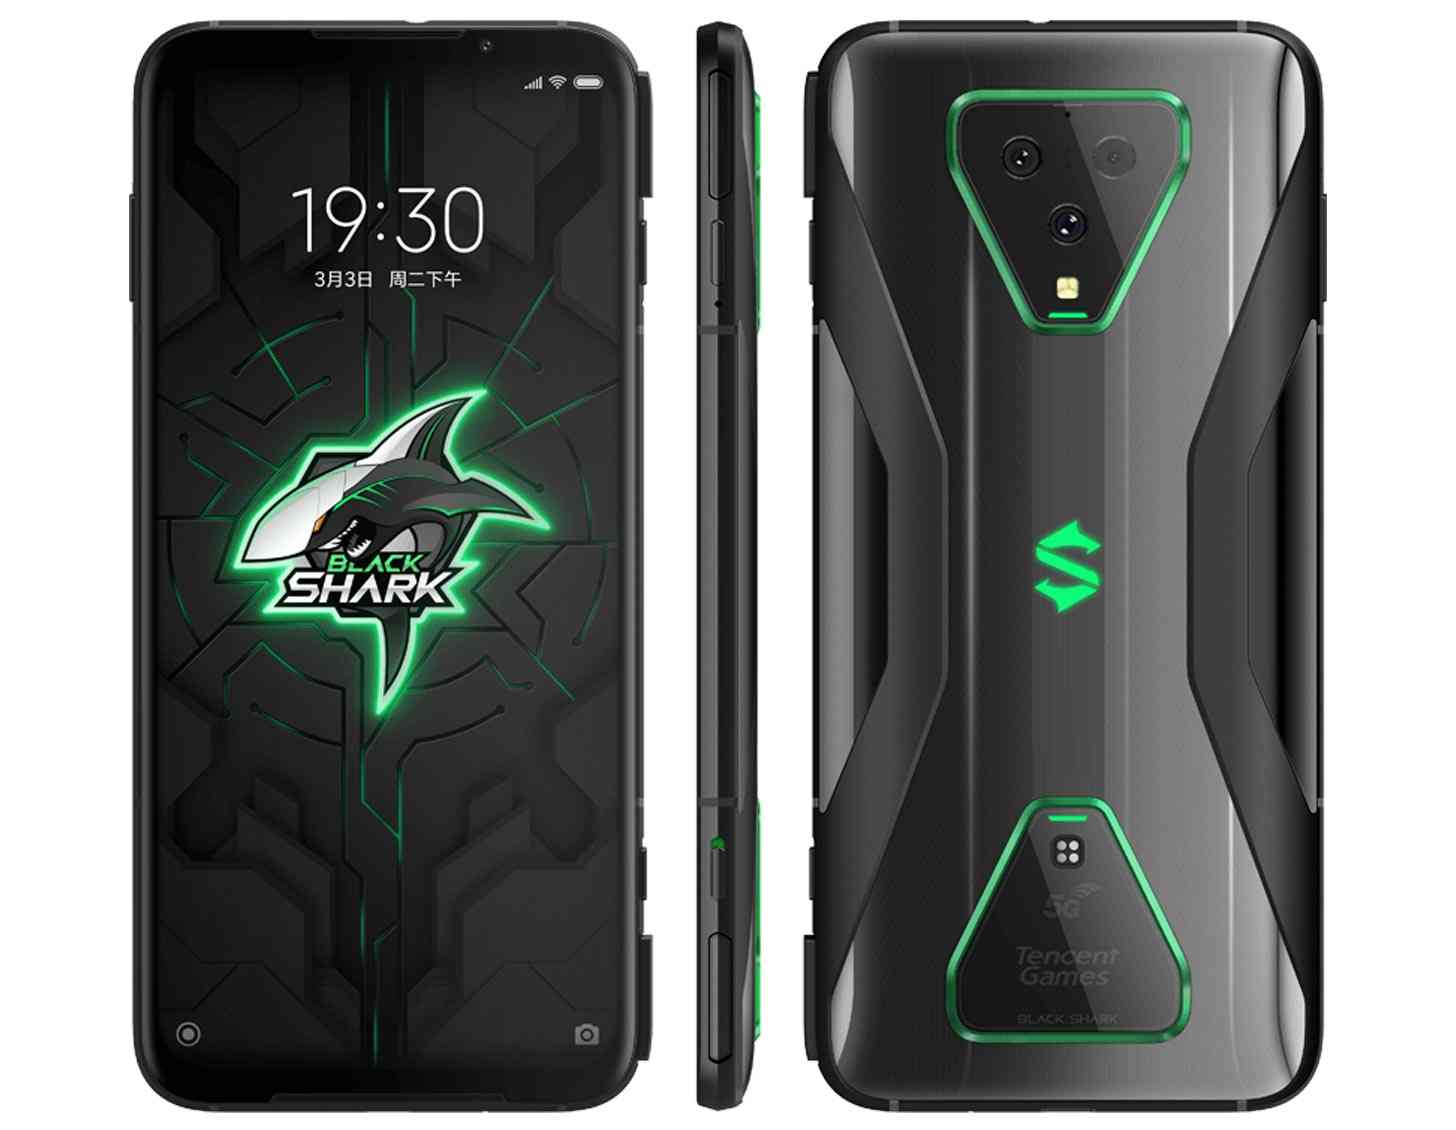 Black Shark 3 Pro gaming phone has a 7.1-inch screen and physical